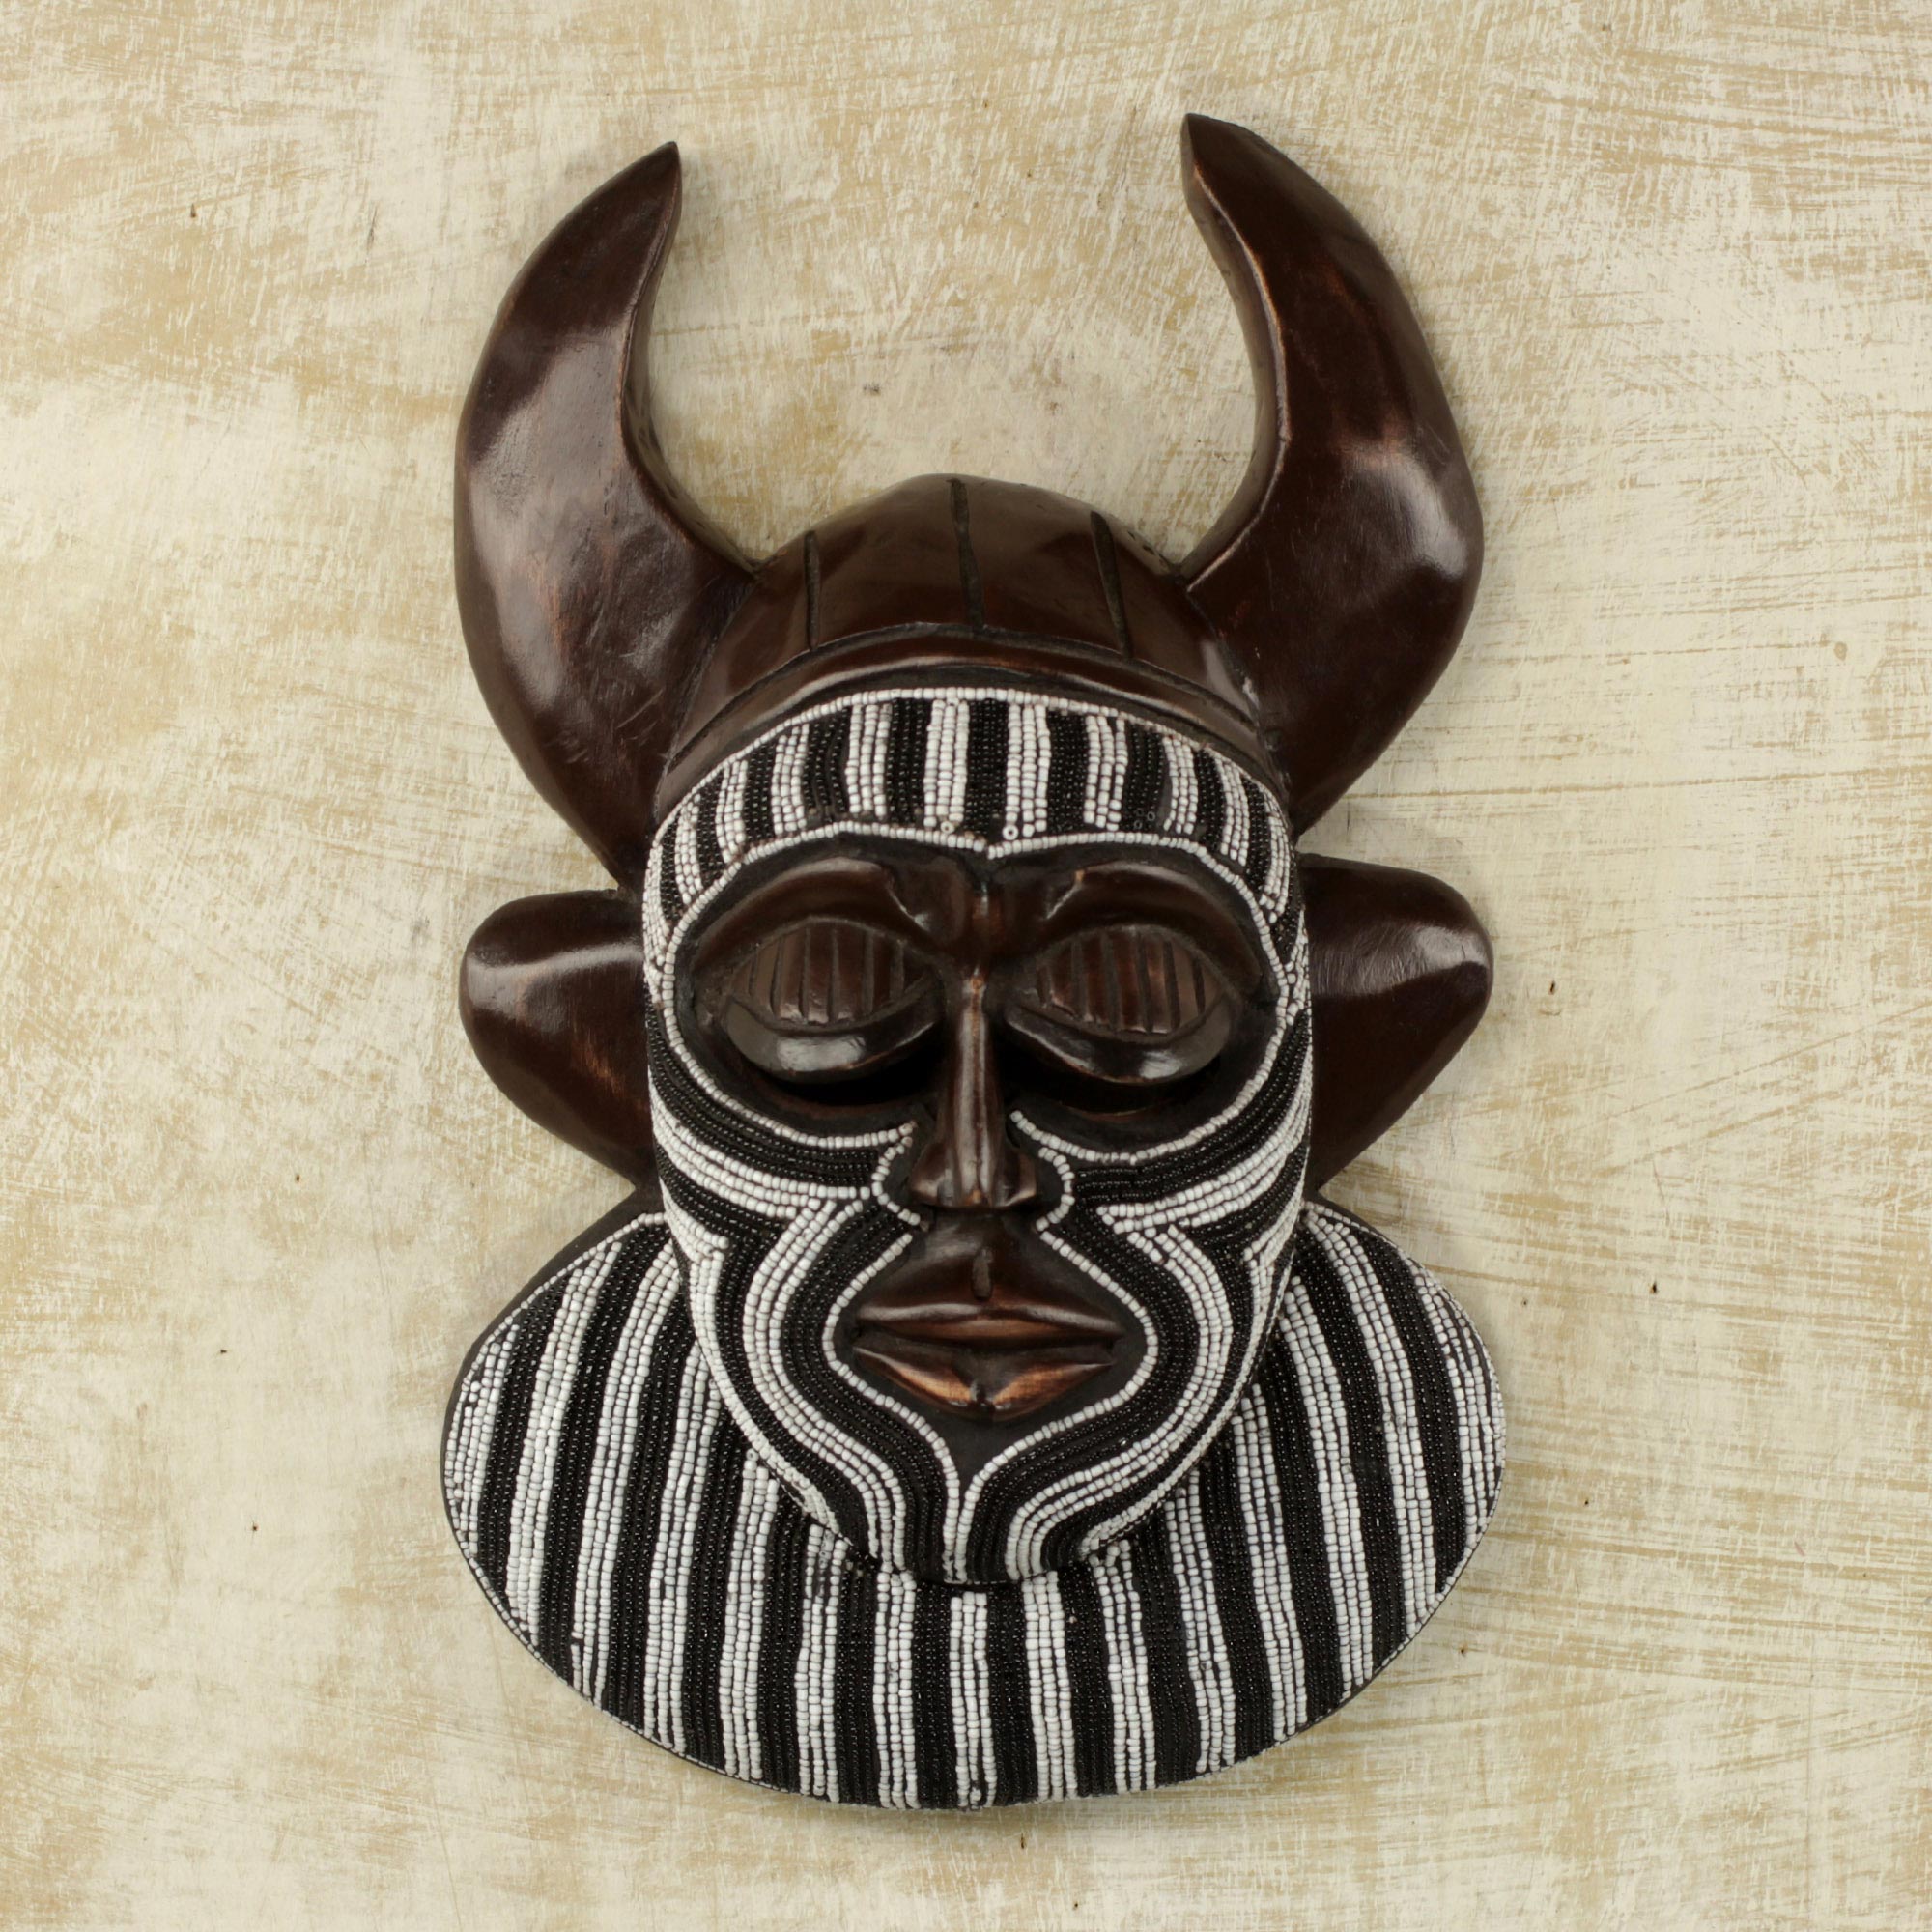 Kafo Horns Black and White Beaded African Wood Horn Wall Mask of Power Beautiful African Mask